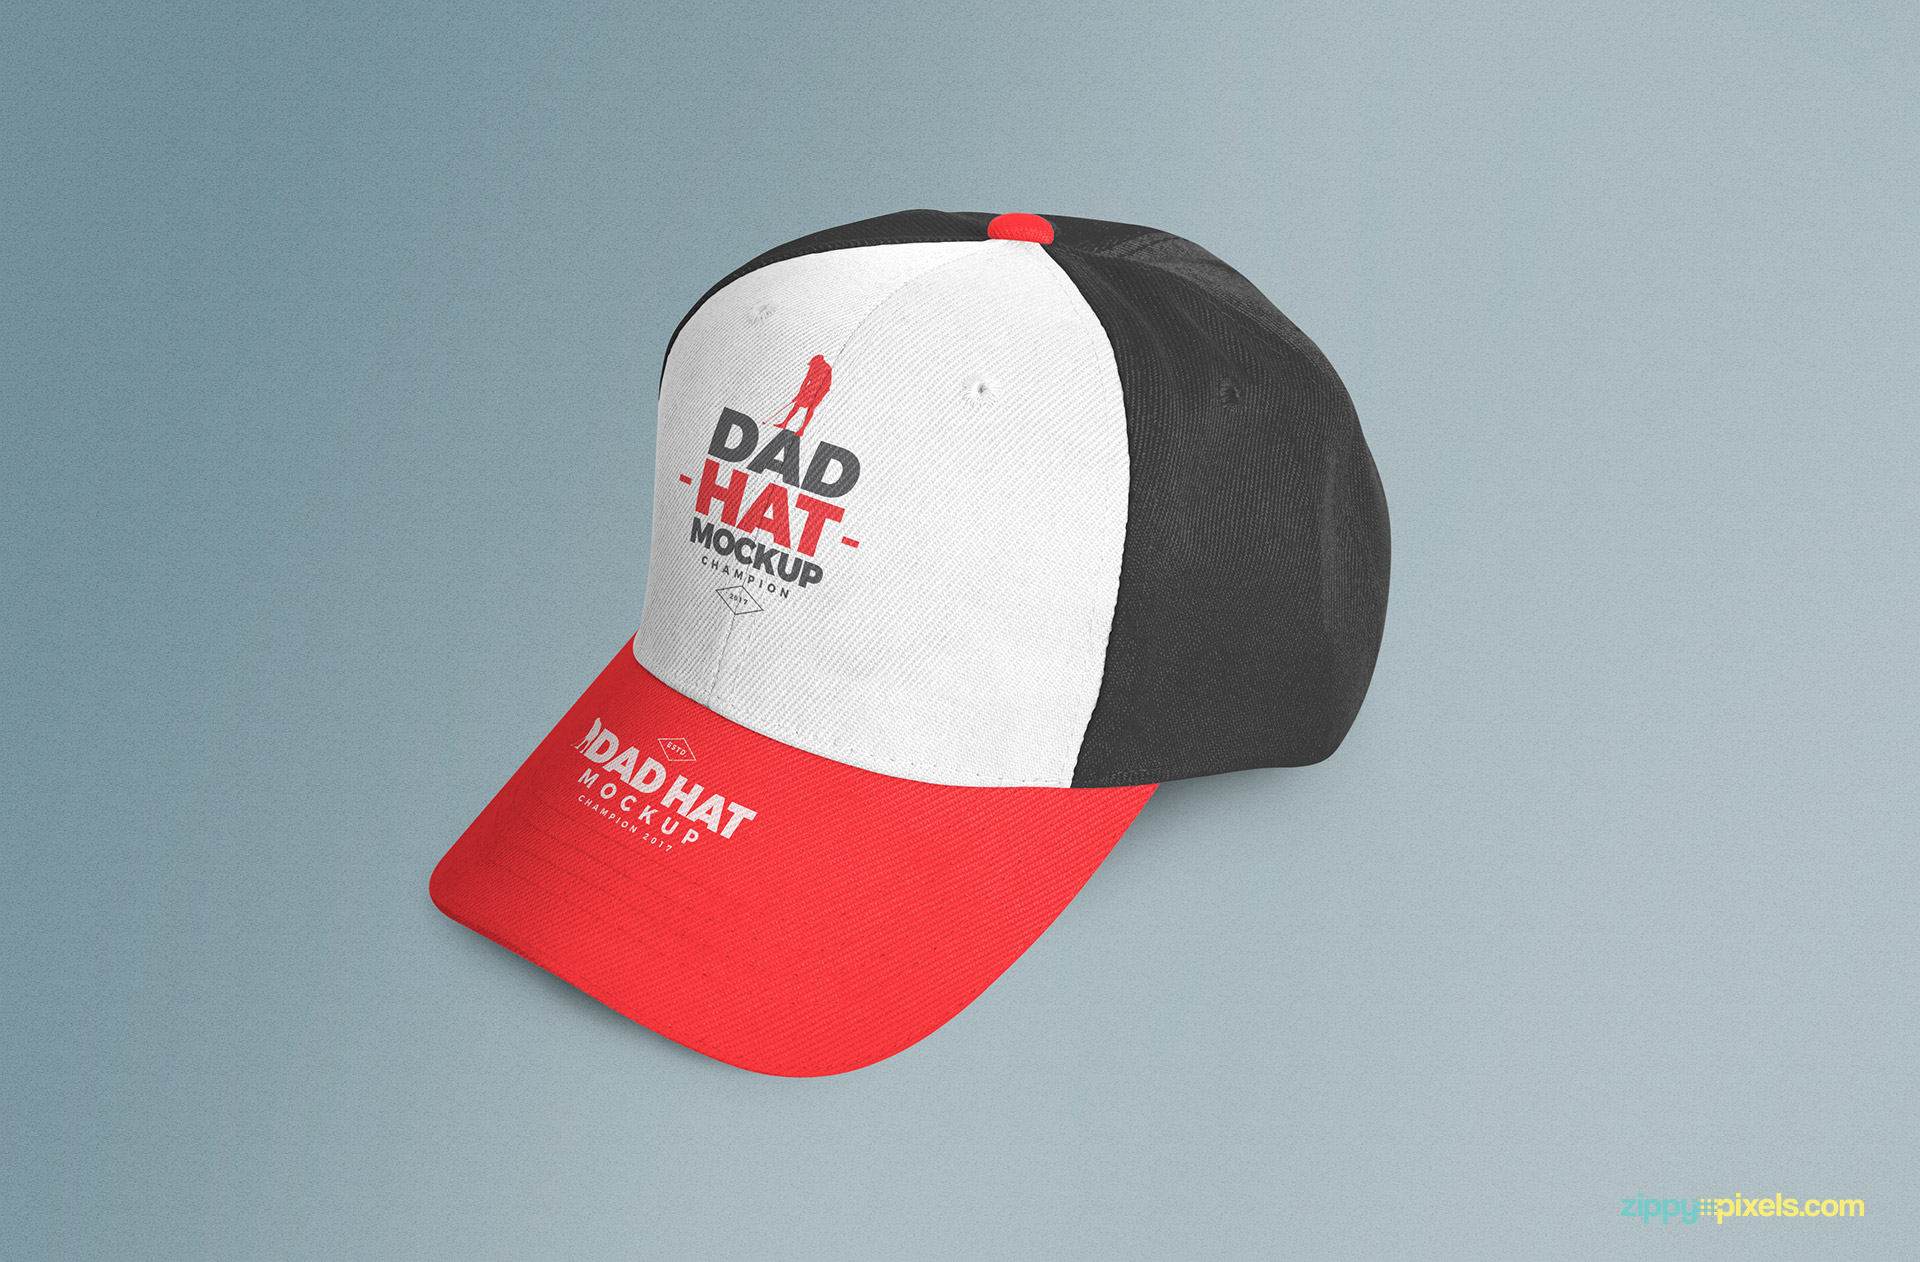 excellent cap mockup psd with fully changeable front panel and brim designs